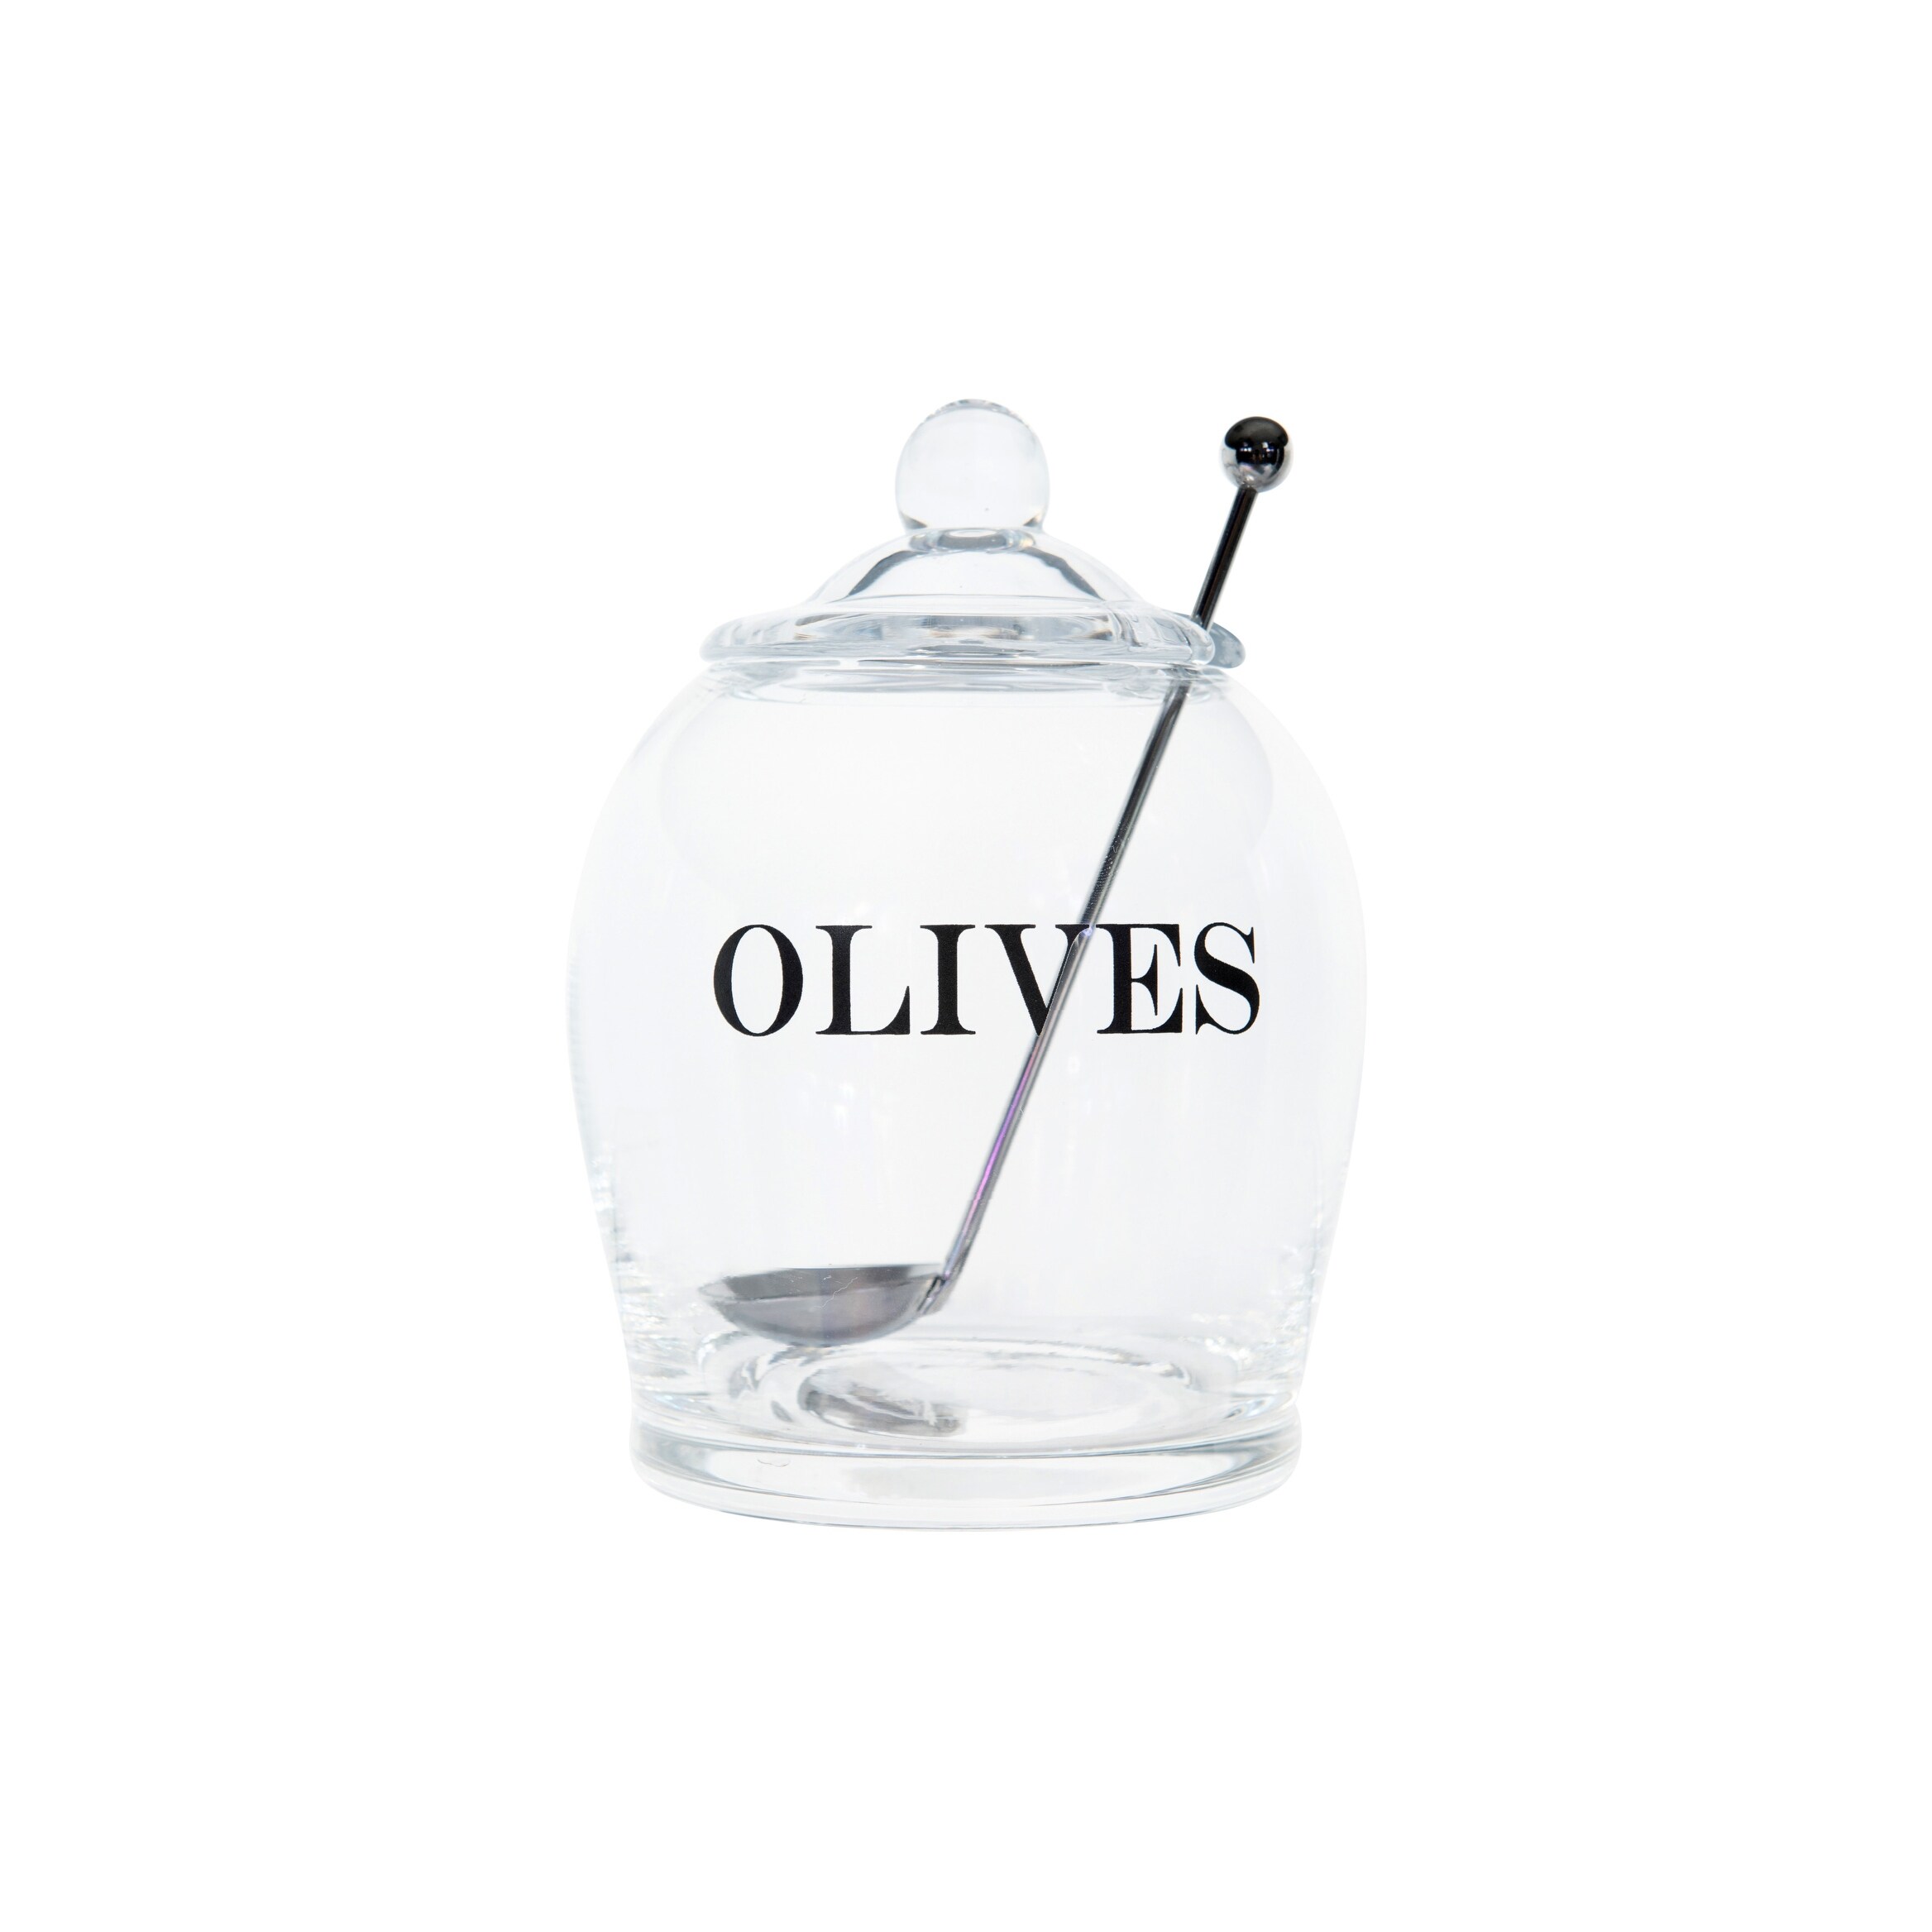 https://ak1.ostkcdn.com/images/products/is/images/direct/5971075bdcfac47f9055b386c040e18c65bfb93b/Clear-Glass-%22OLIVE%22-Jar-with-Lid-%26-Slotted-Stainless-Steel-Spoon-%28Set-of-3-Pieces-including-Lid%29.jpg